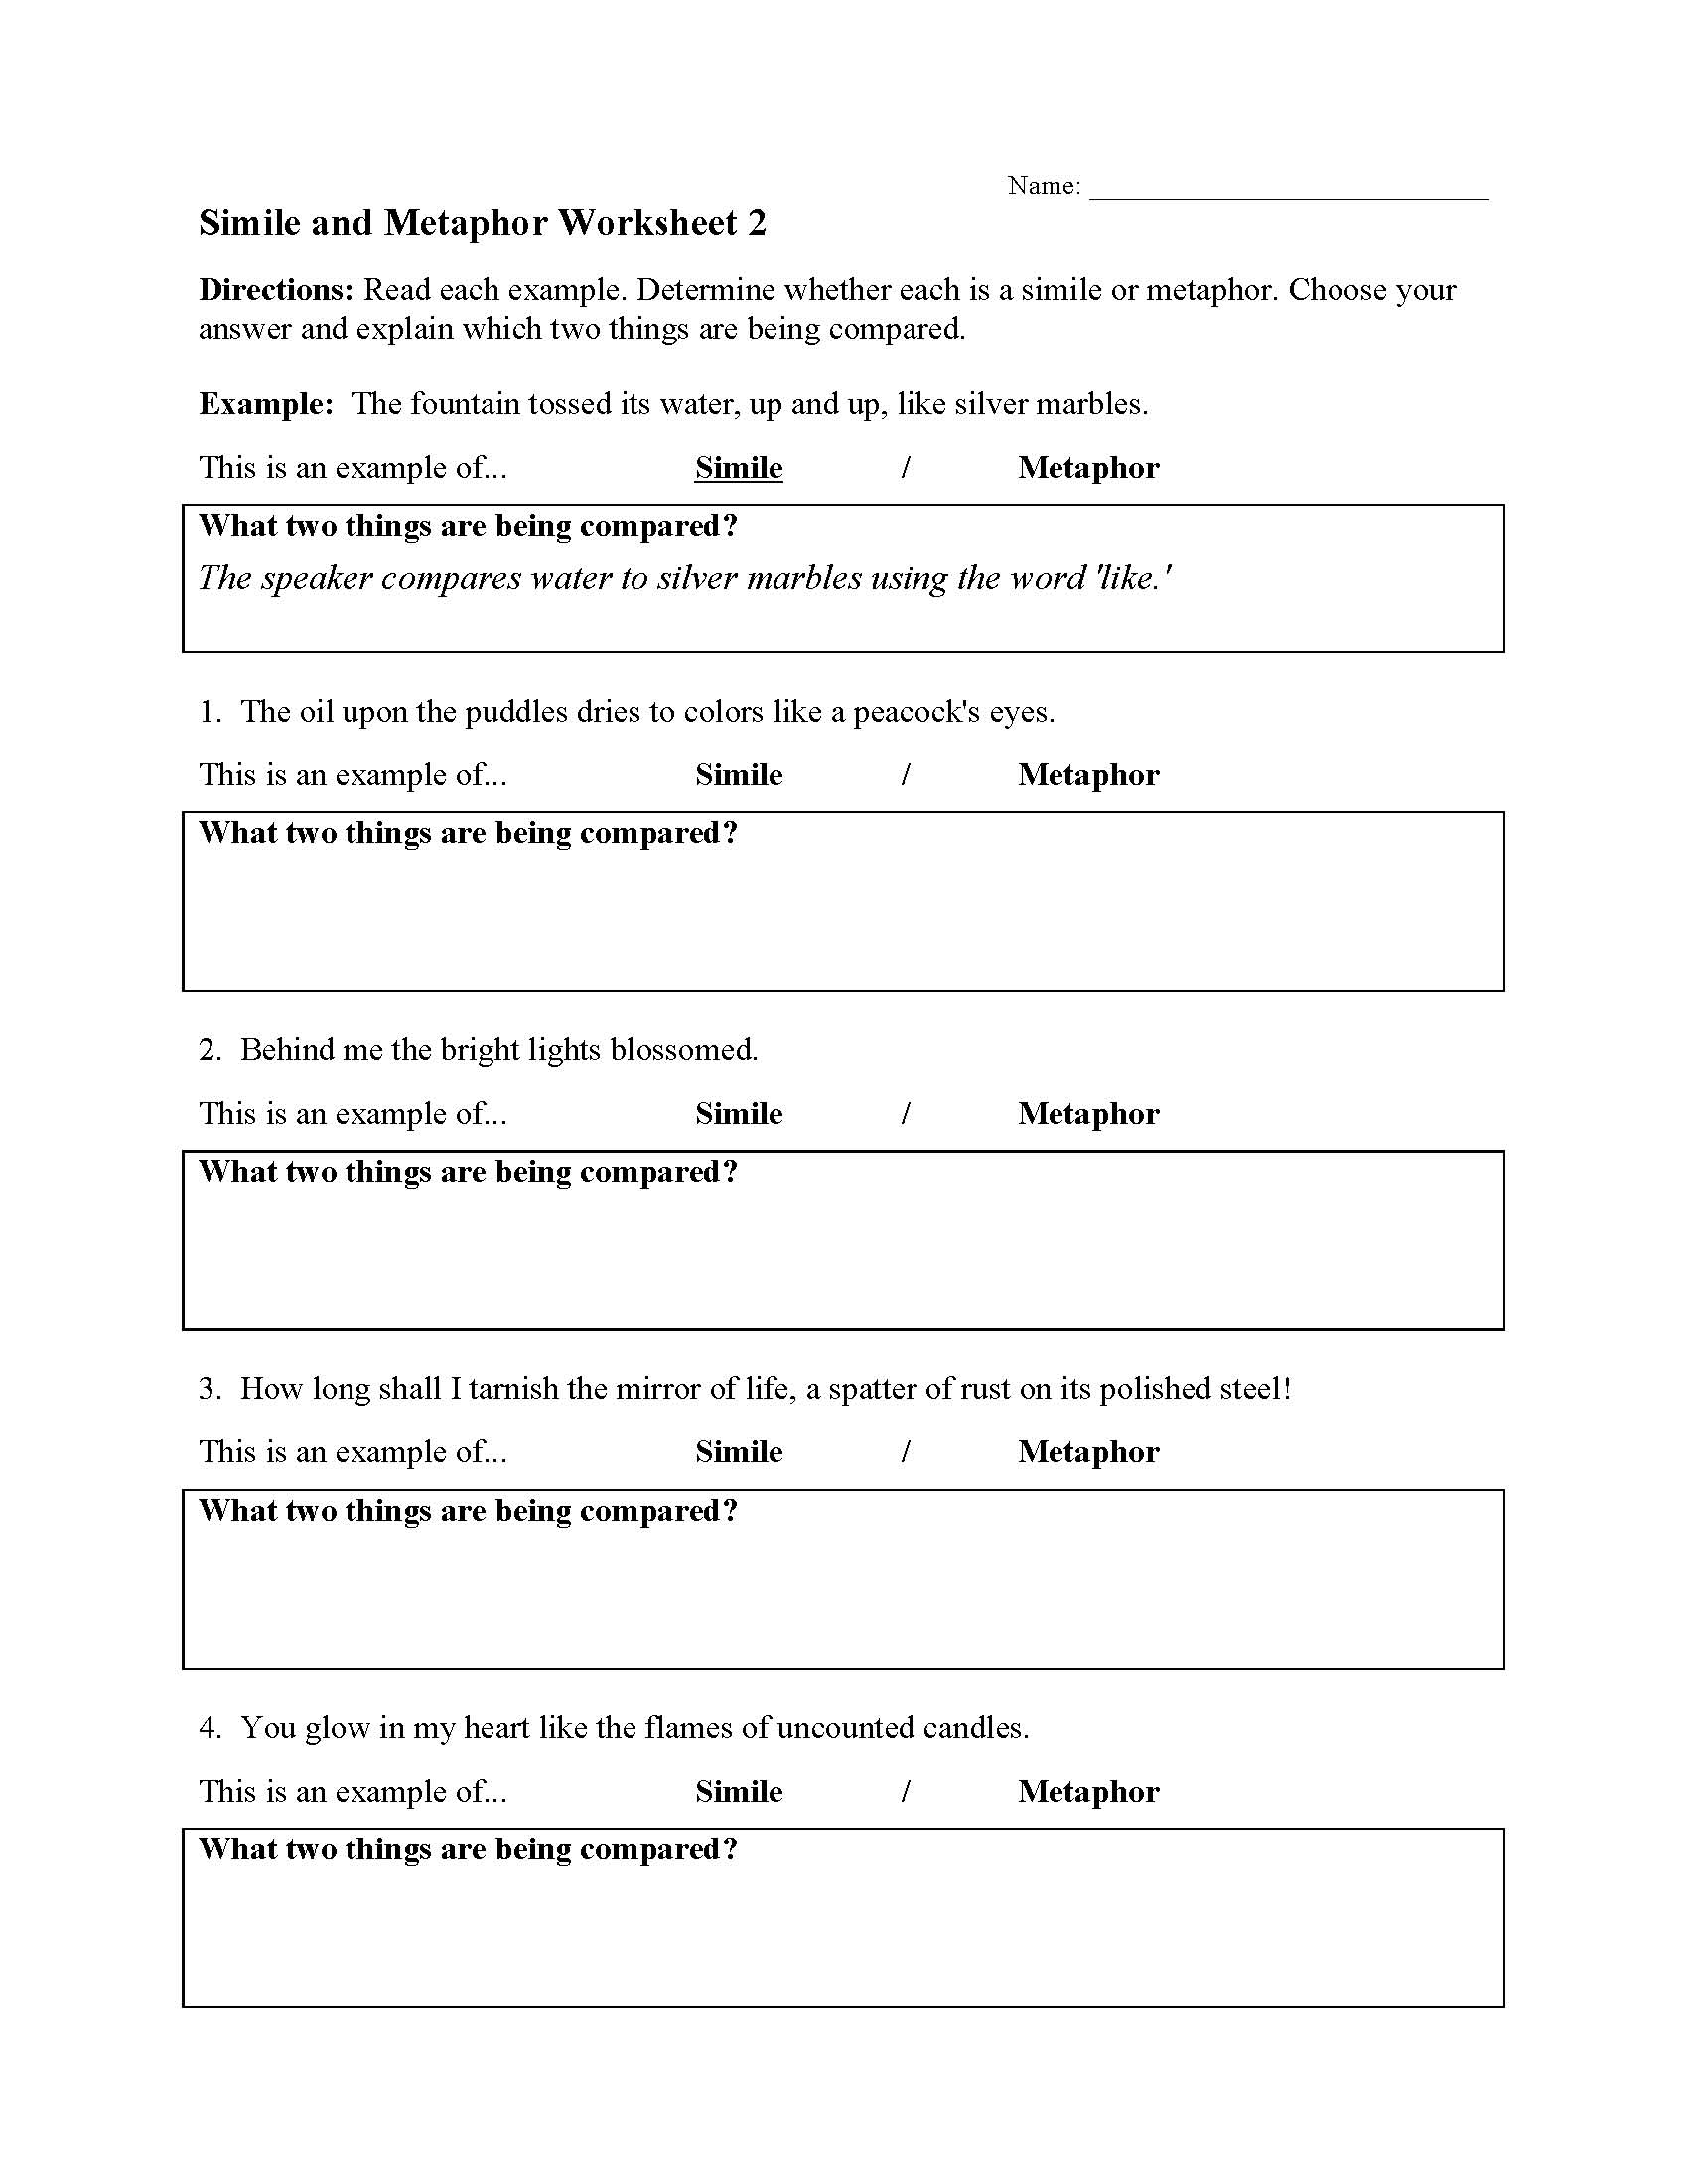 This is a preview image of Simile and Metaphor Worksheet 2. Click on it to enlarge it or view the source file.